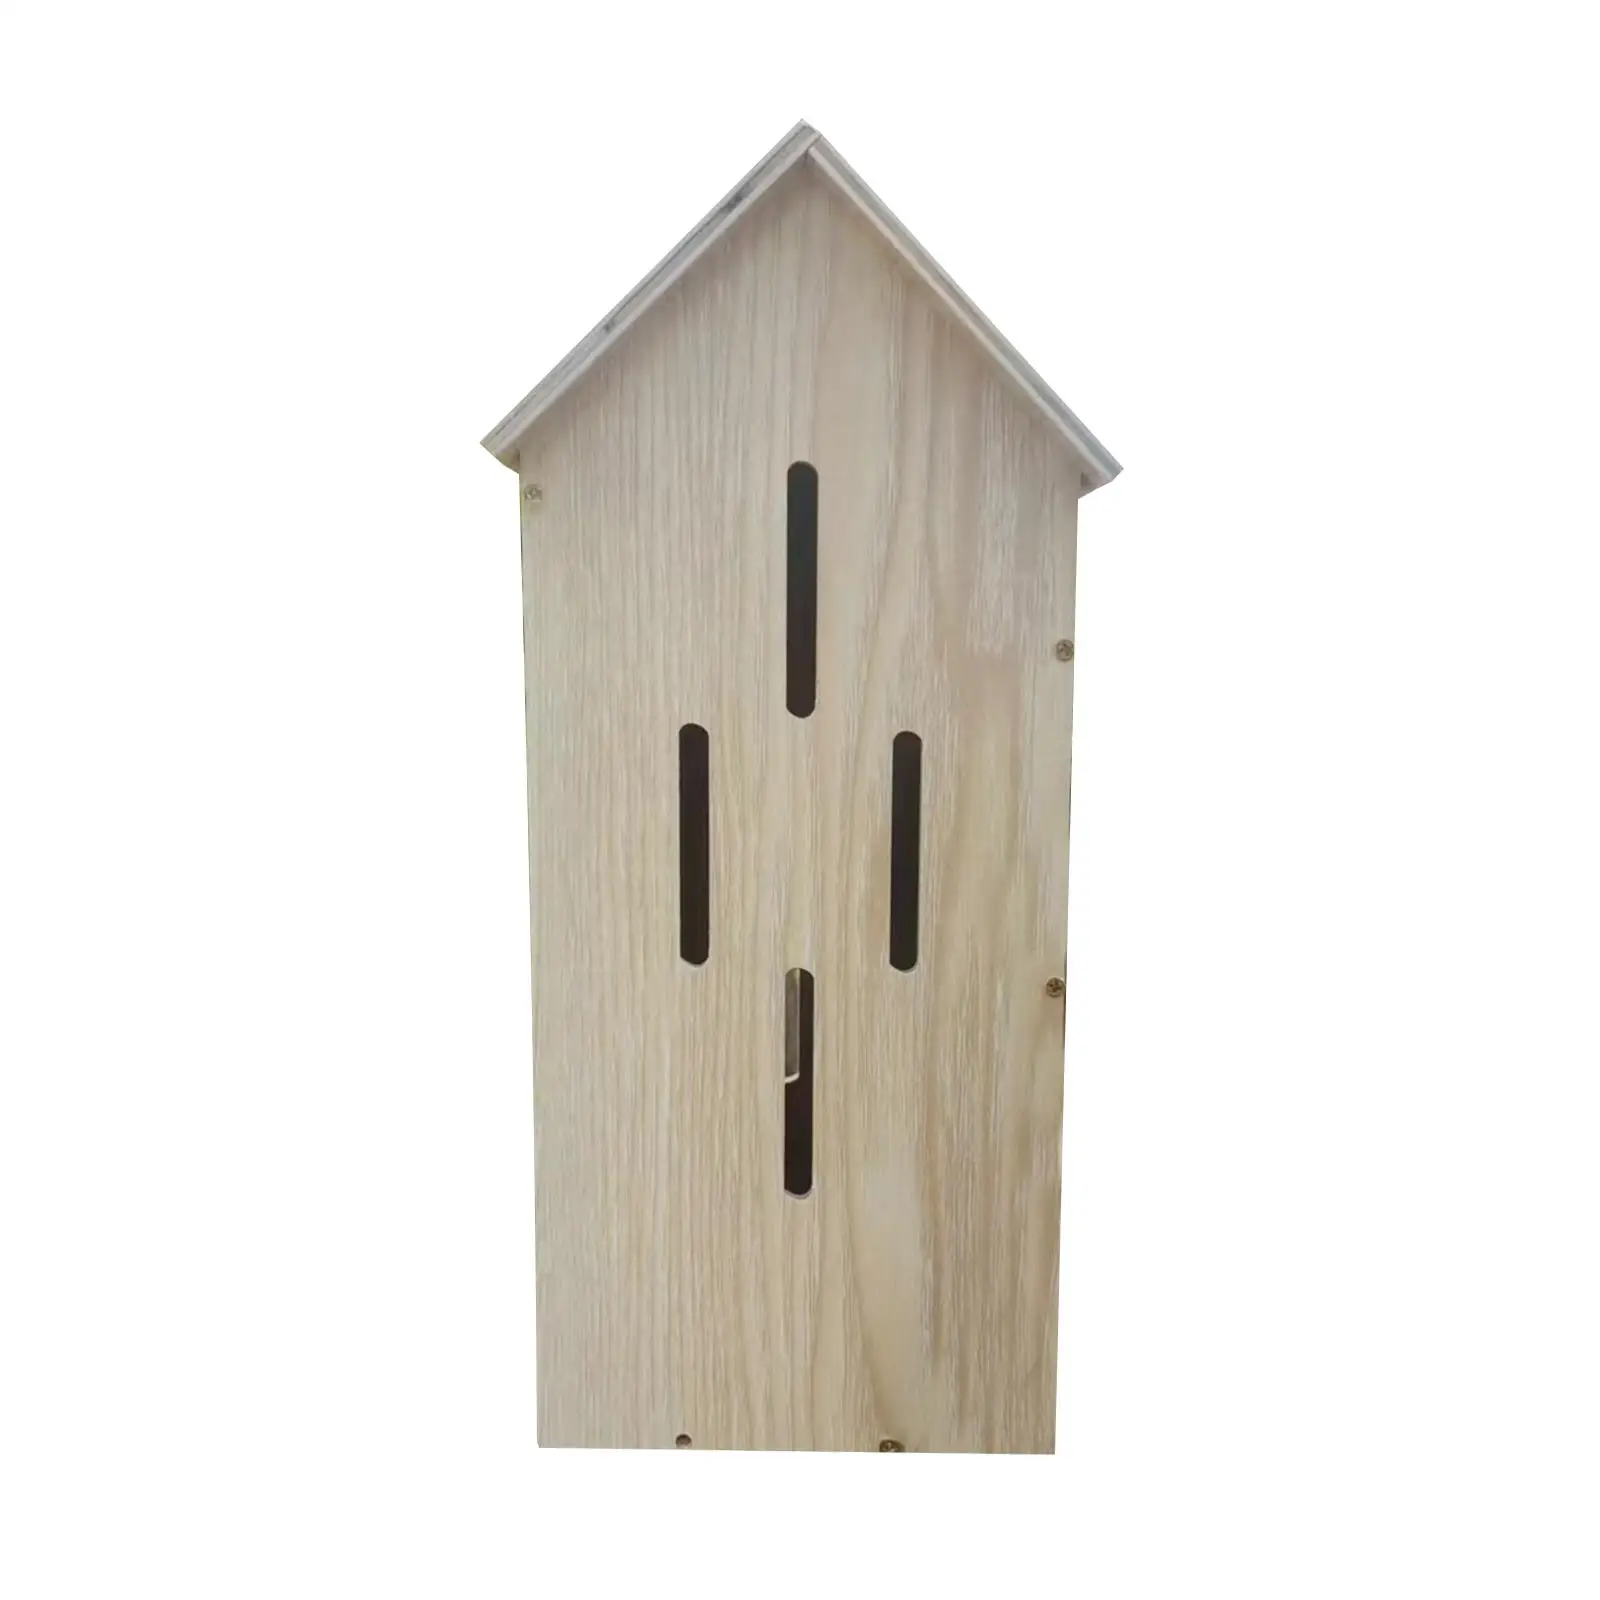 Butterfly Habitat Supplies Tree Trunk Protector Guard Bird house Kit House Wooden Butterfly House for Hotel Room